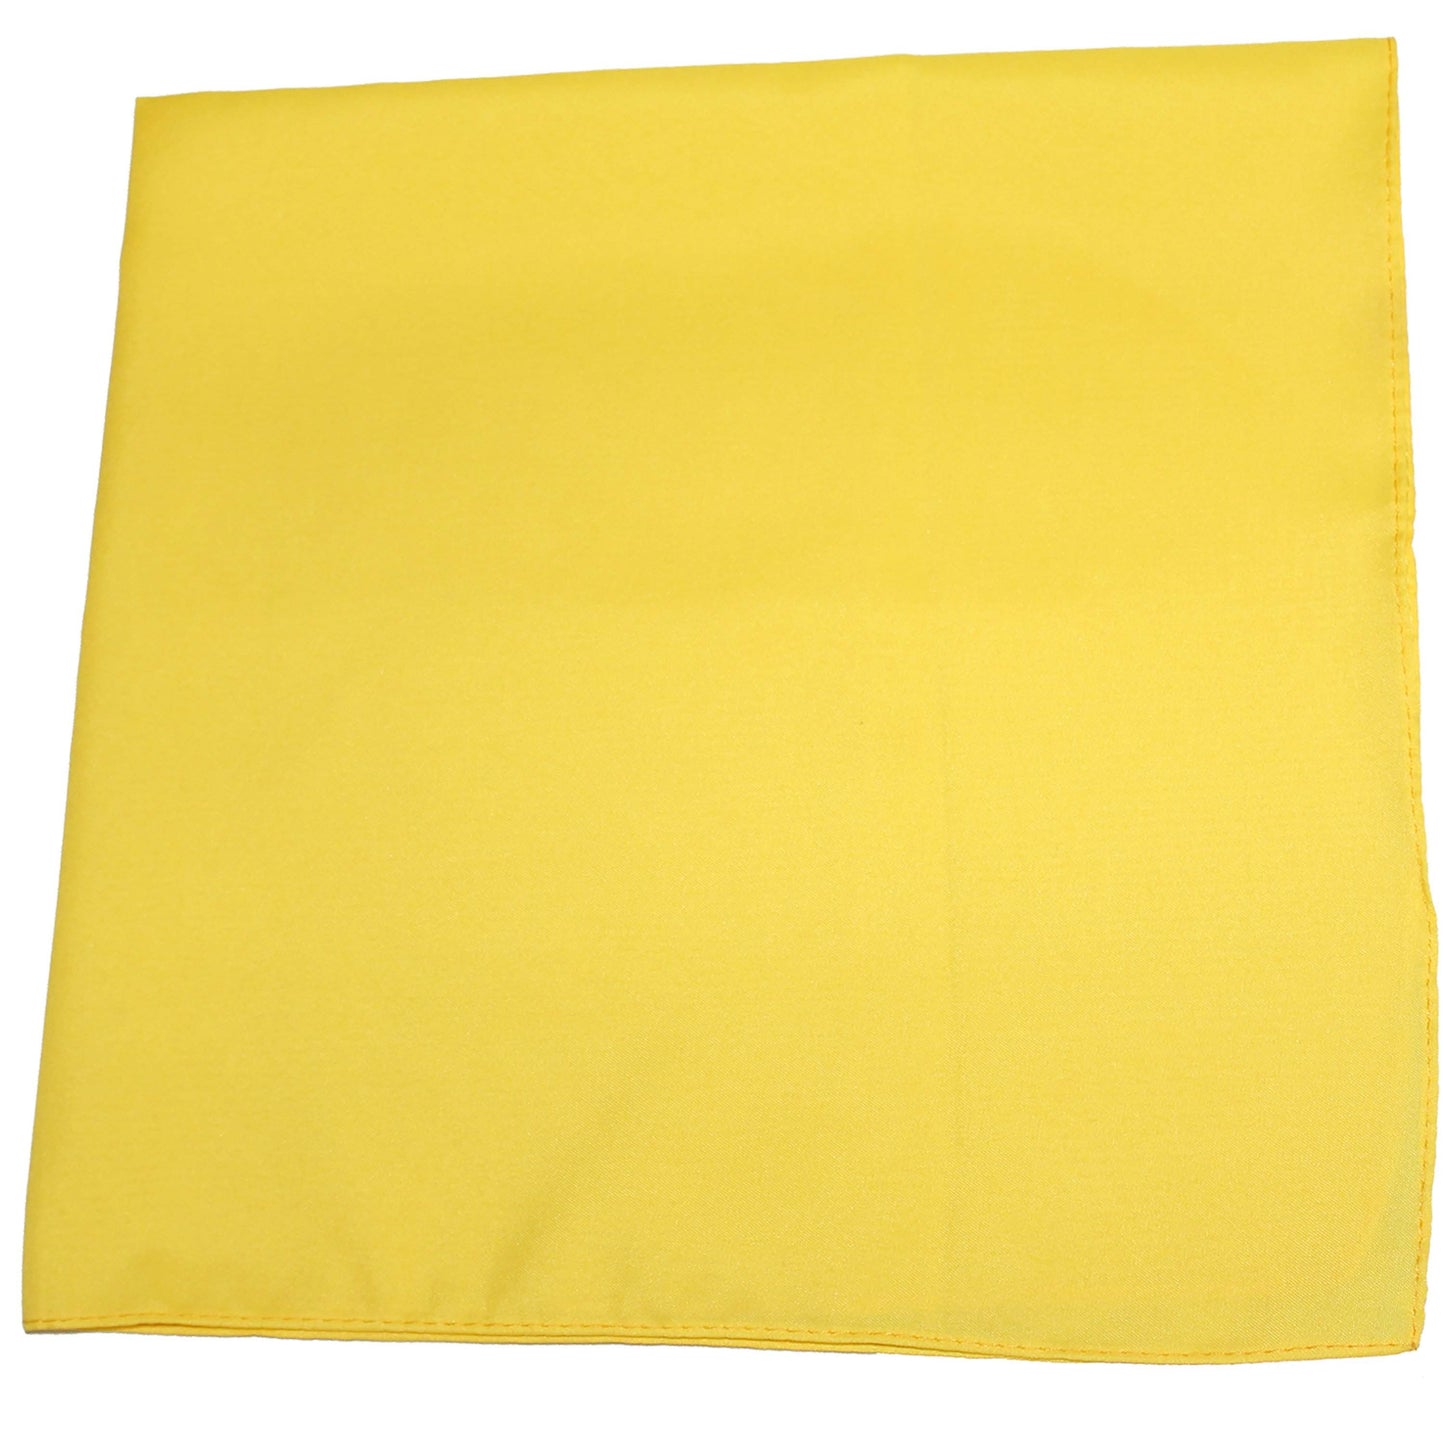 48 Pack Solid Extra Large Sewn Edges Polyester Bandanas - 27 x 27 Inch - Bulk Lot